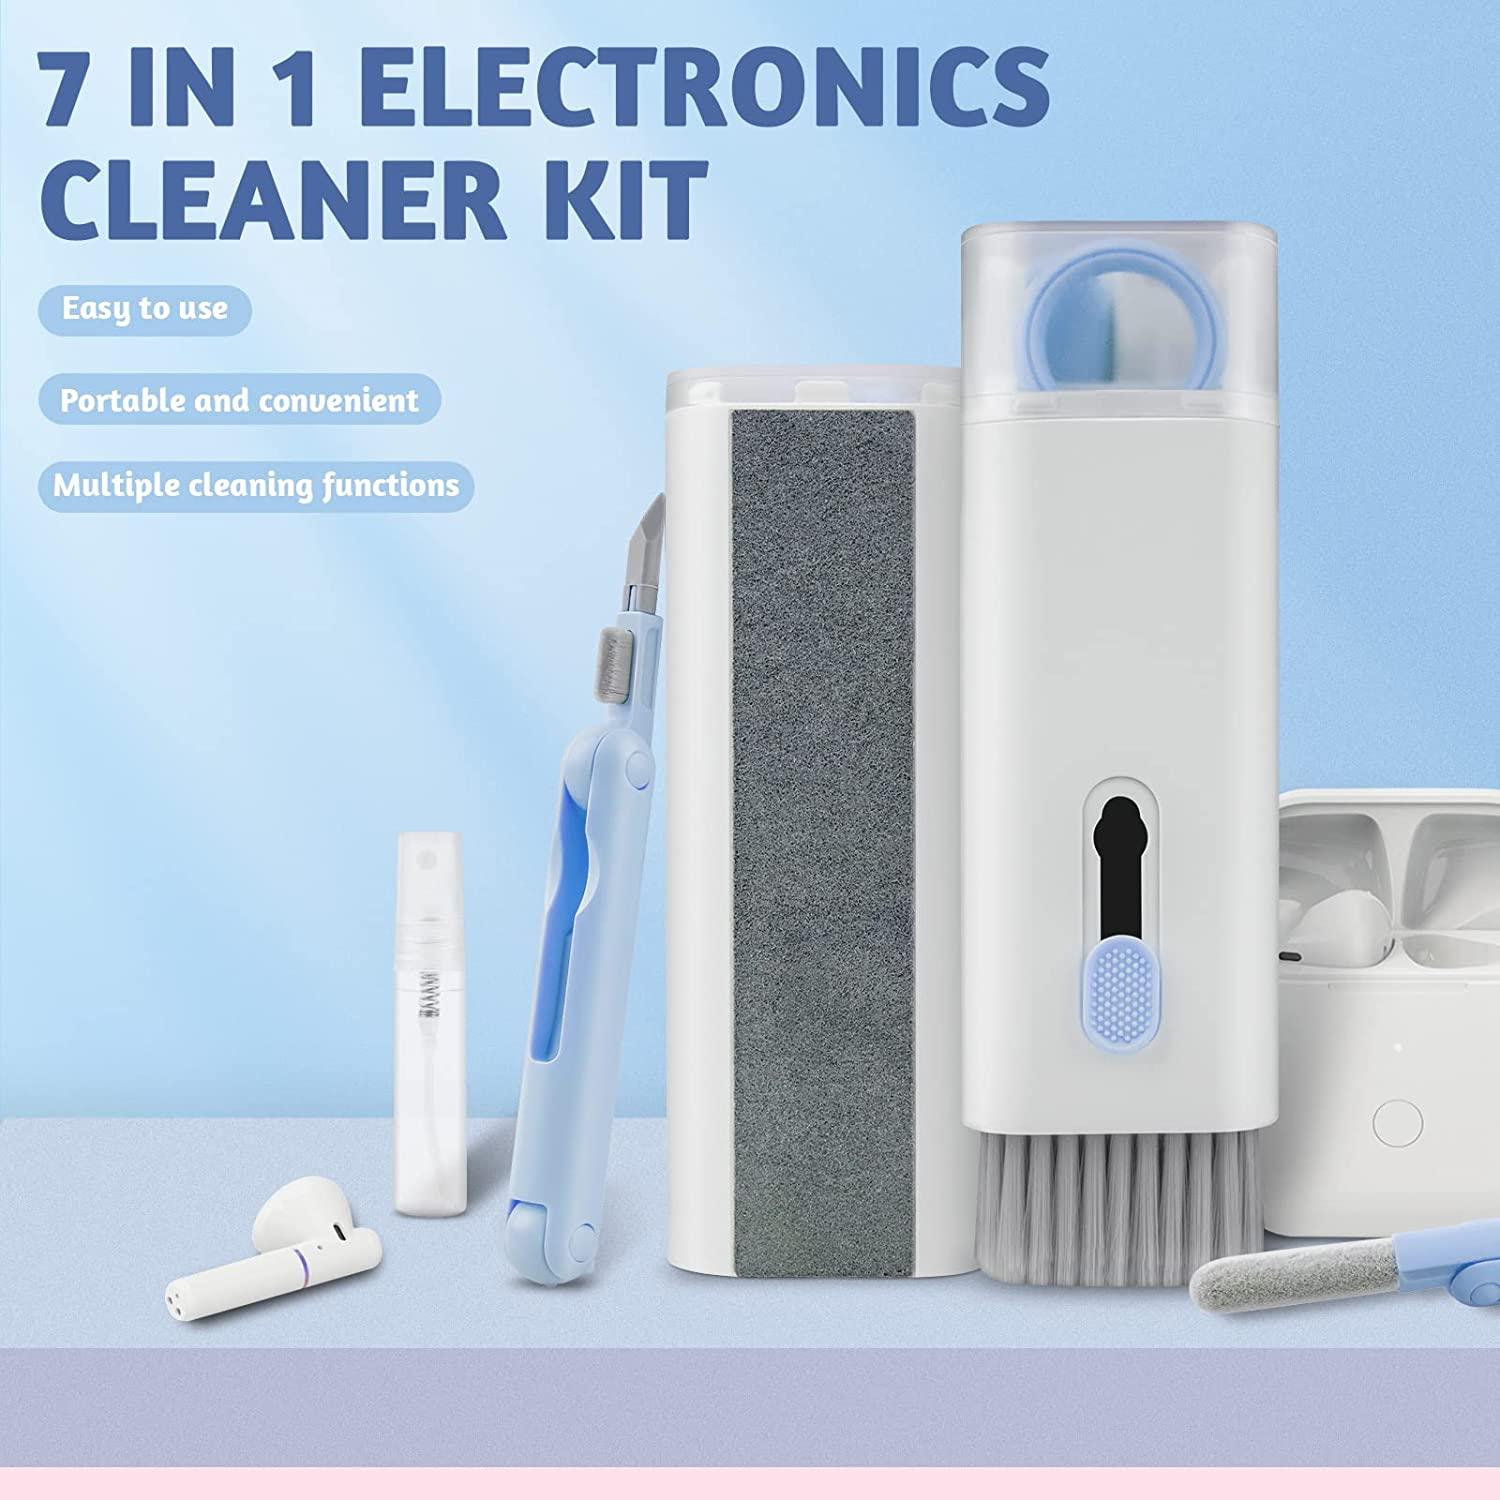 7-in-1 Electronic Cleaner Kit for Airpods Laptop Cleaner, Keyboard Cleaner  Kit, Portable Cleaning Kit with Cleaning Pen Brush for iPhone iPad MacBook  Screen/Keyboard/Headphones 